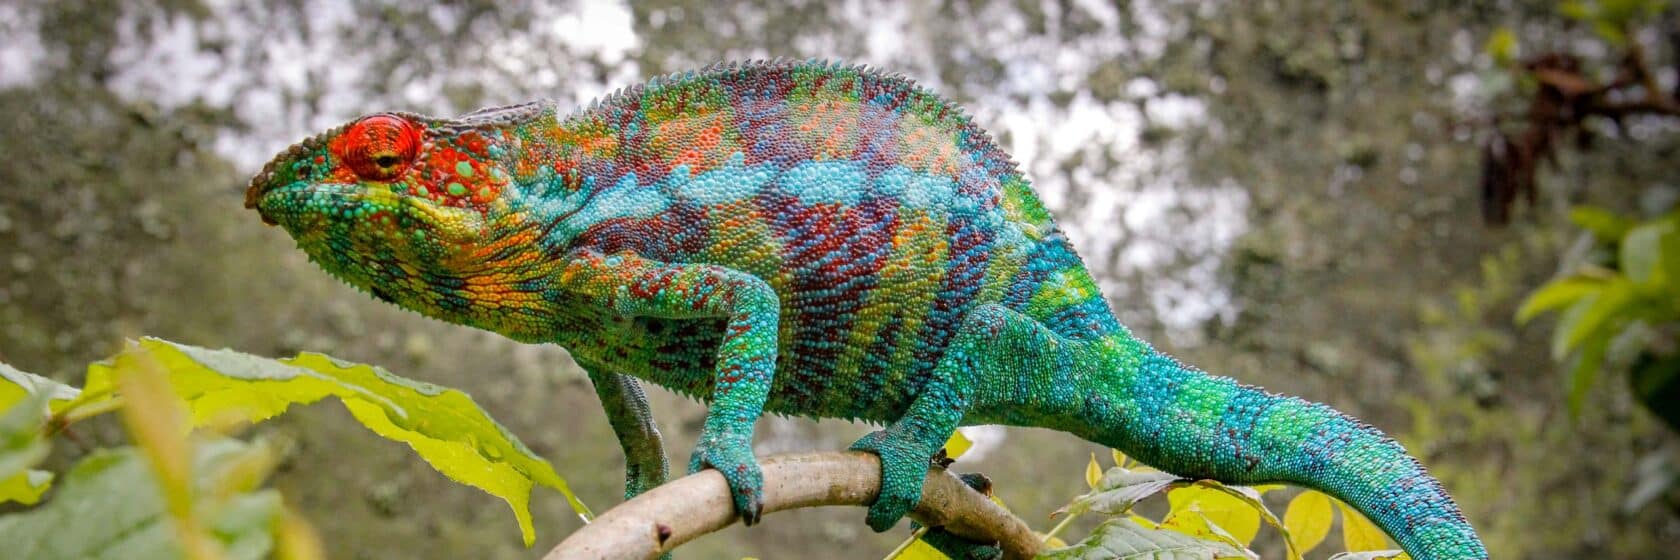 Panther chameleon on branch in Madagascar shows its colors: red, orange, yellow, green, blue, purple.